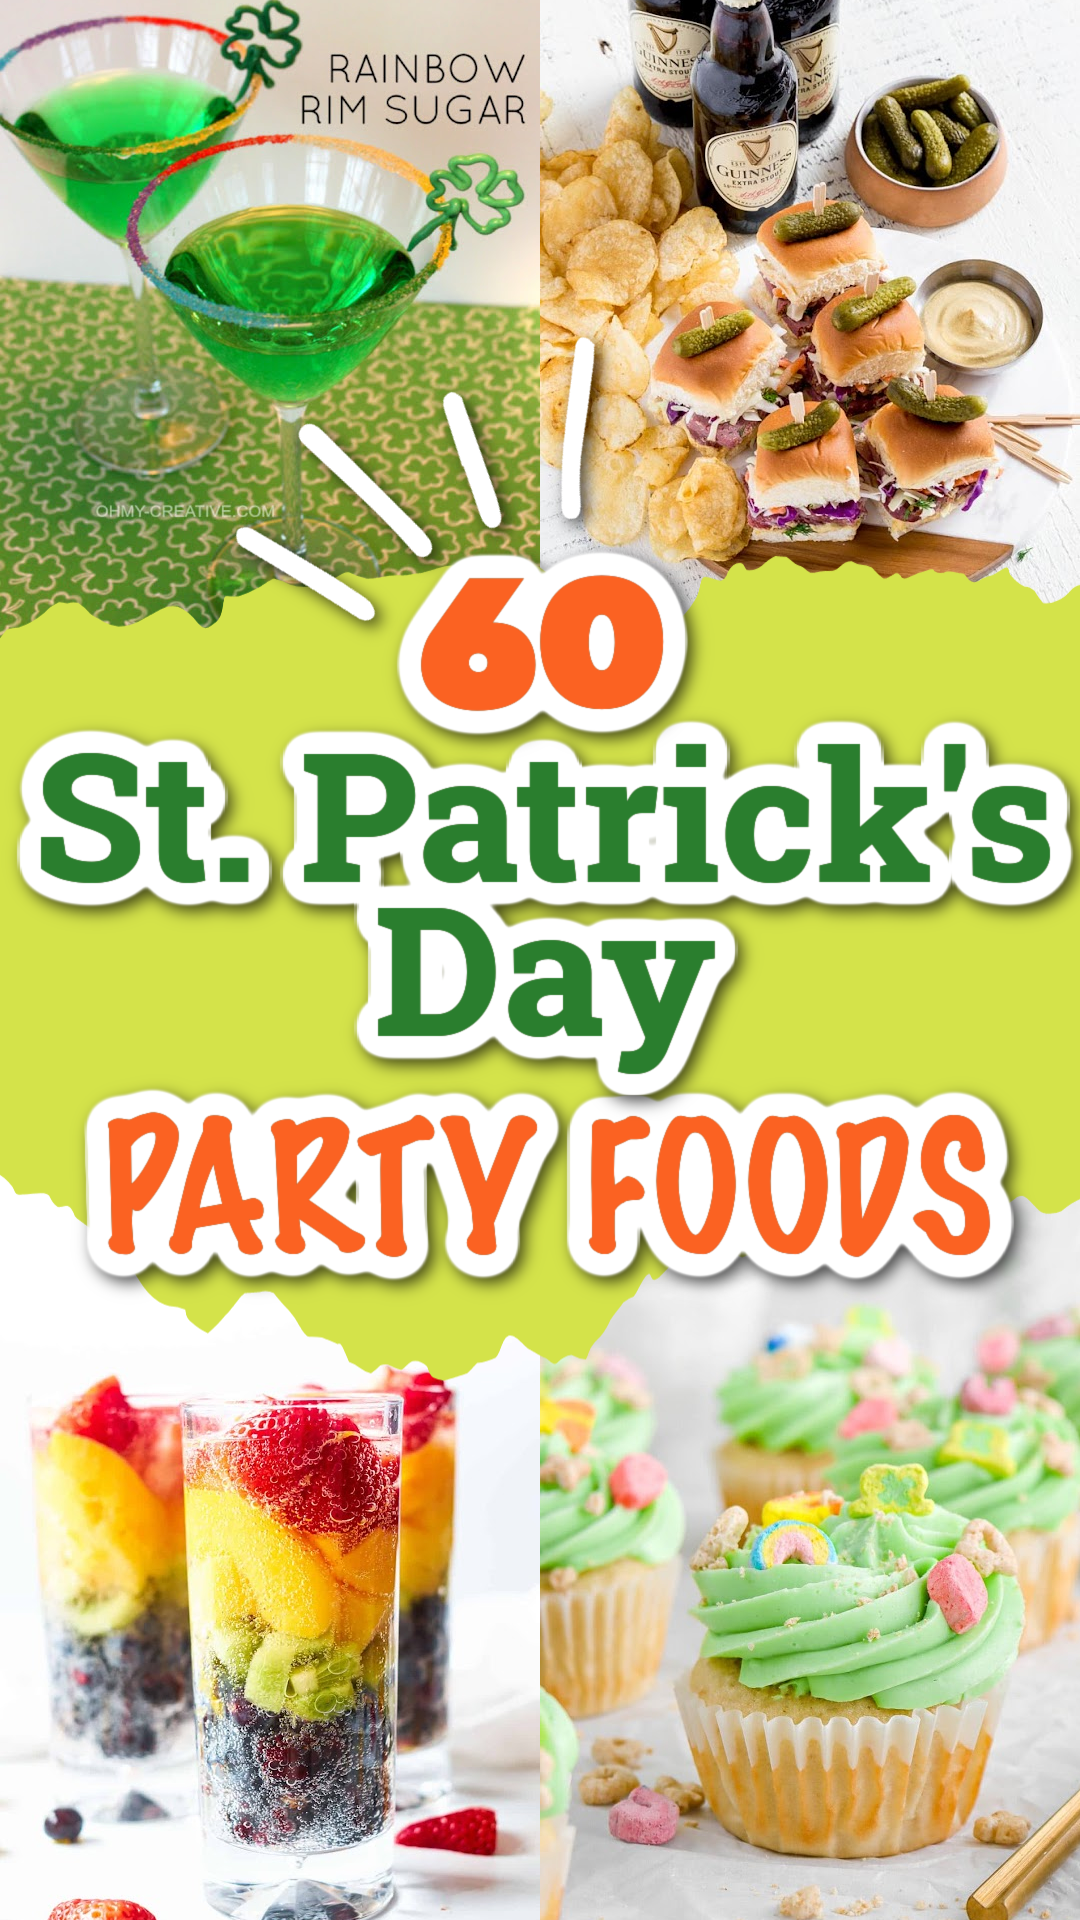 A collage of festive St. Patrick's Day party food including Irish recipes, treats, jello shots and cocktails.